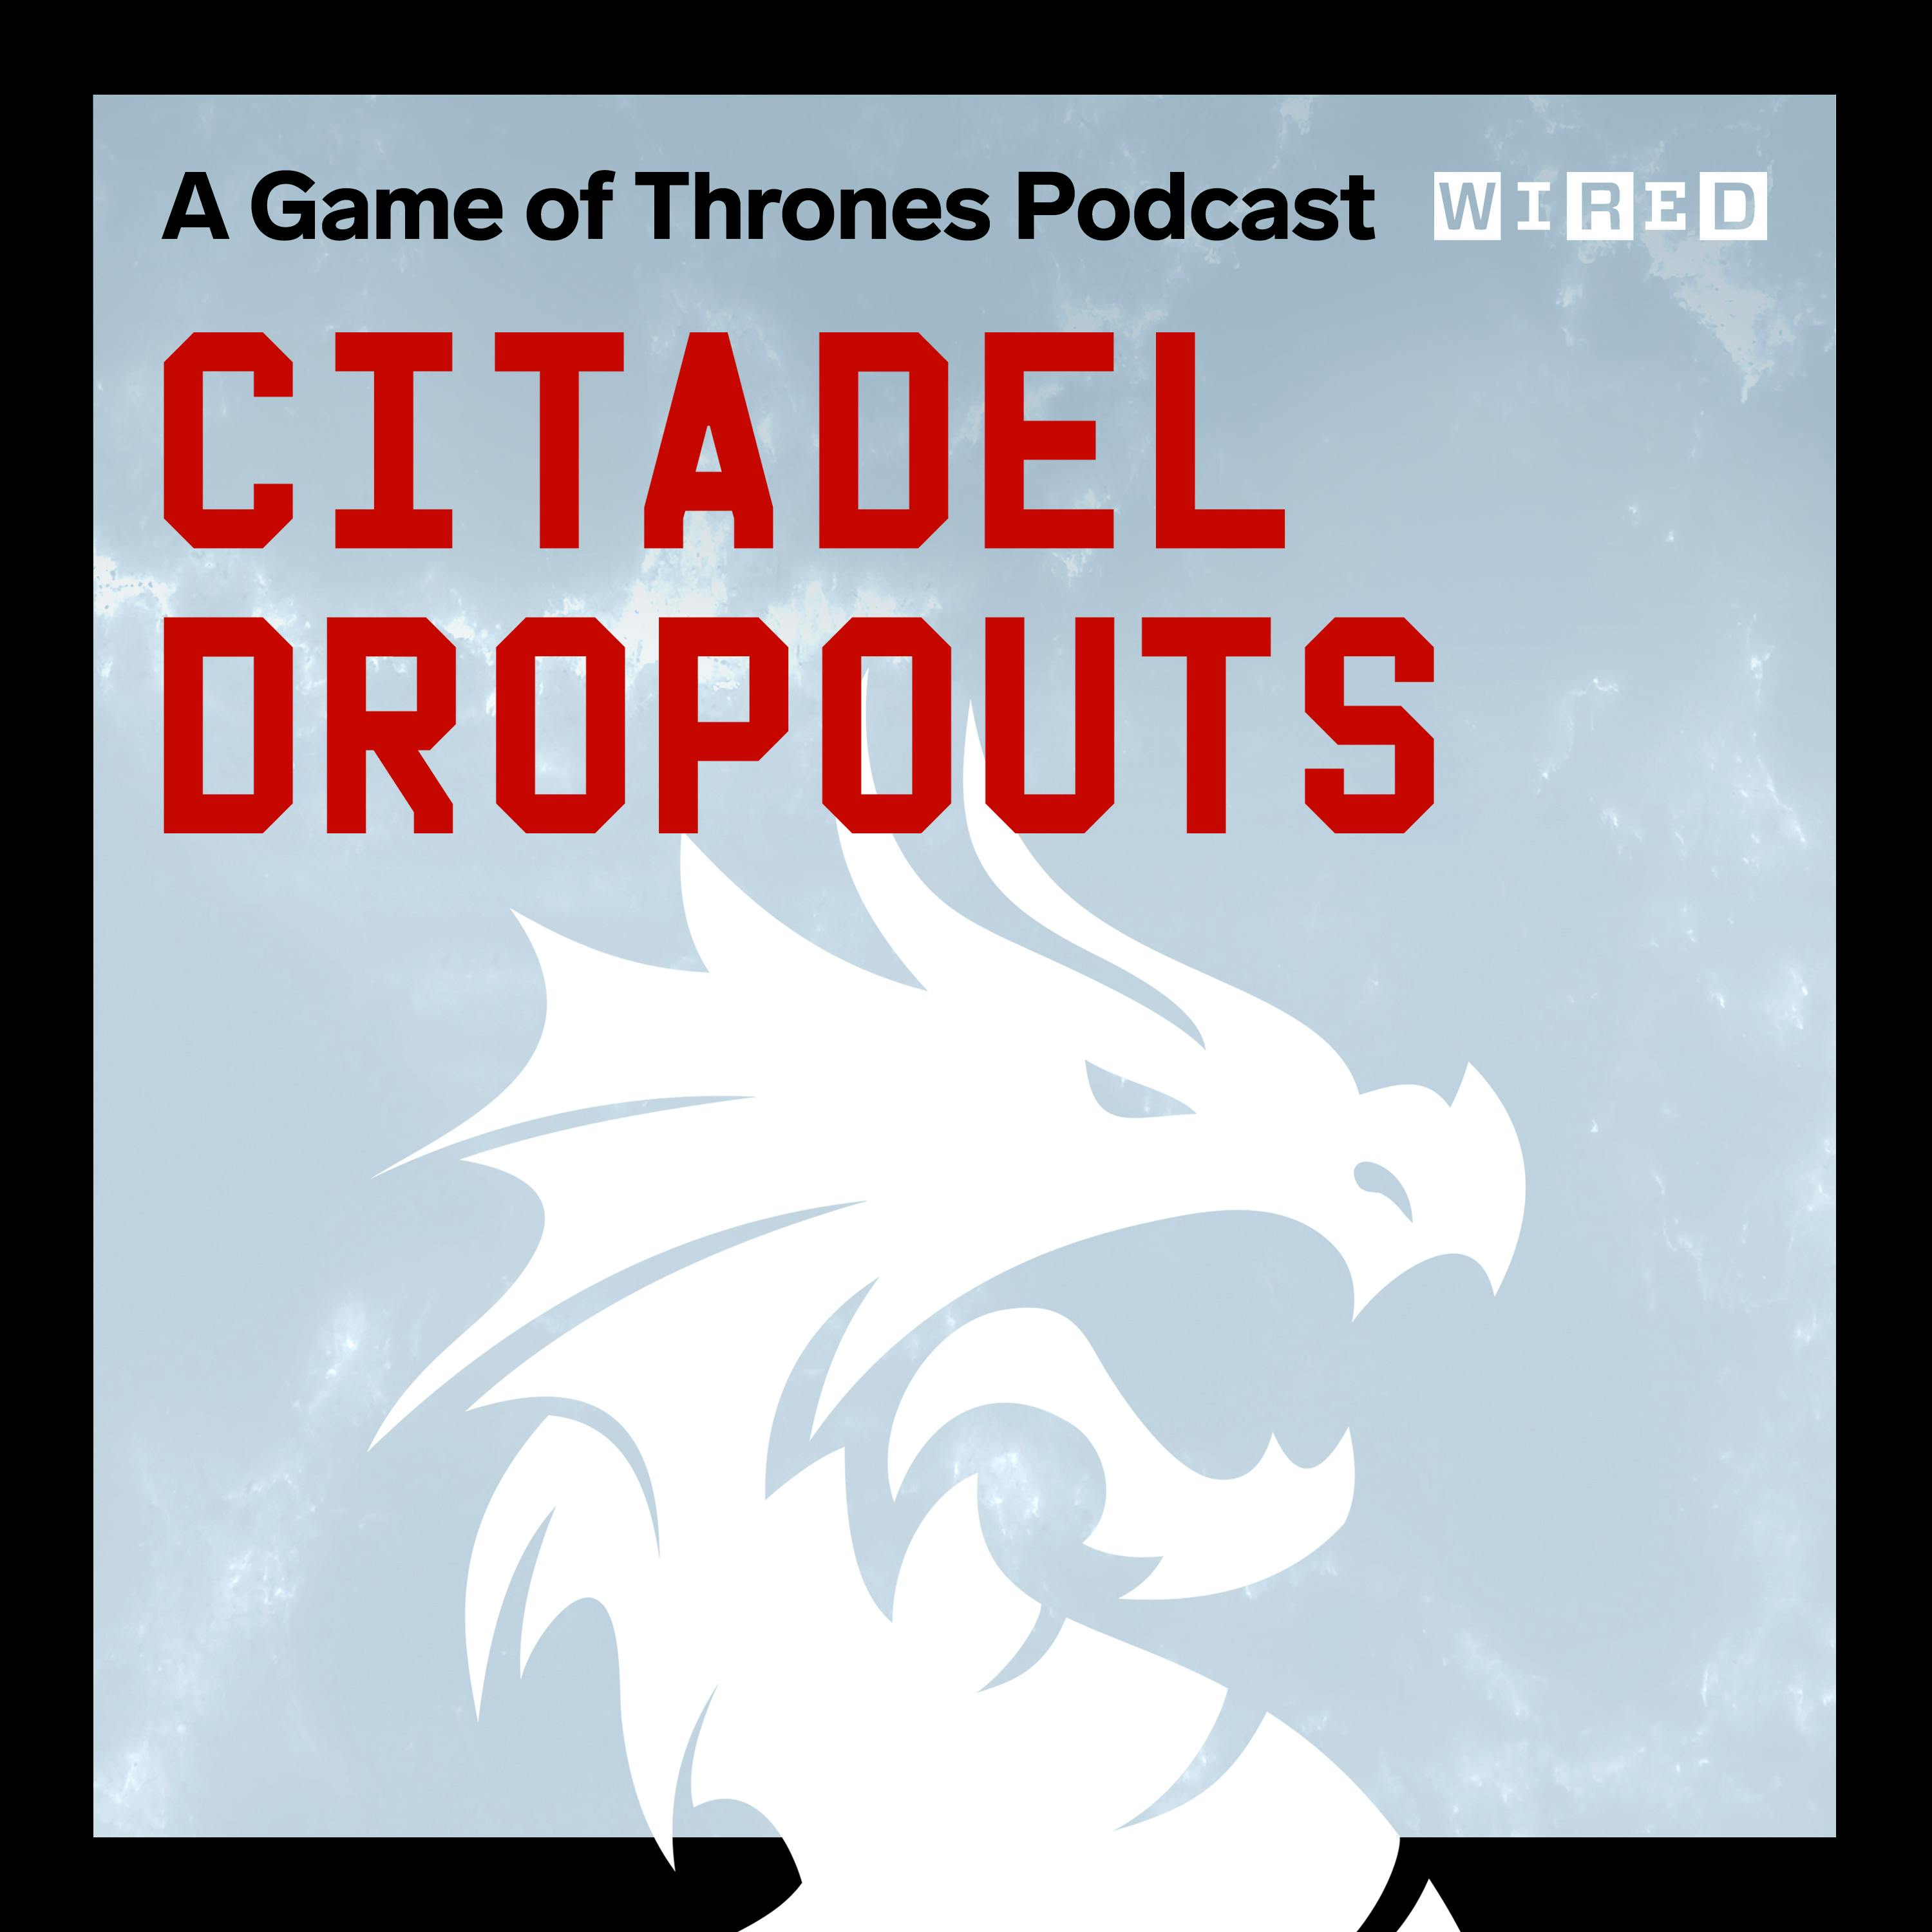 Introducing Citadel Dropouts: A Game of Thrones Podcast